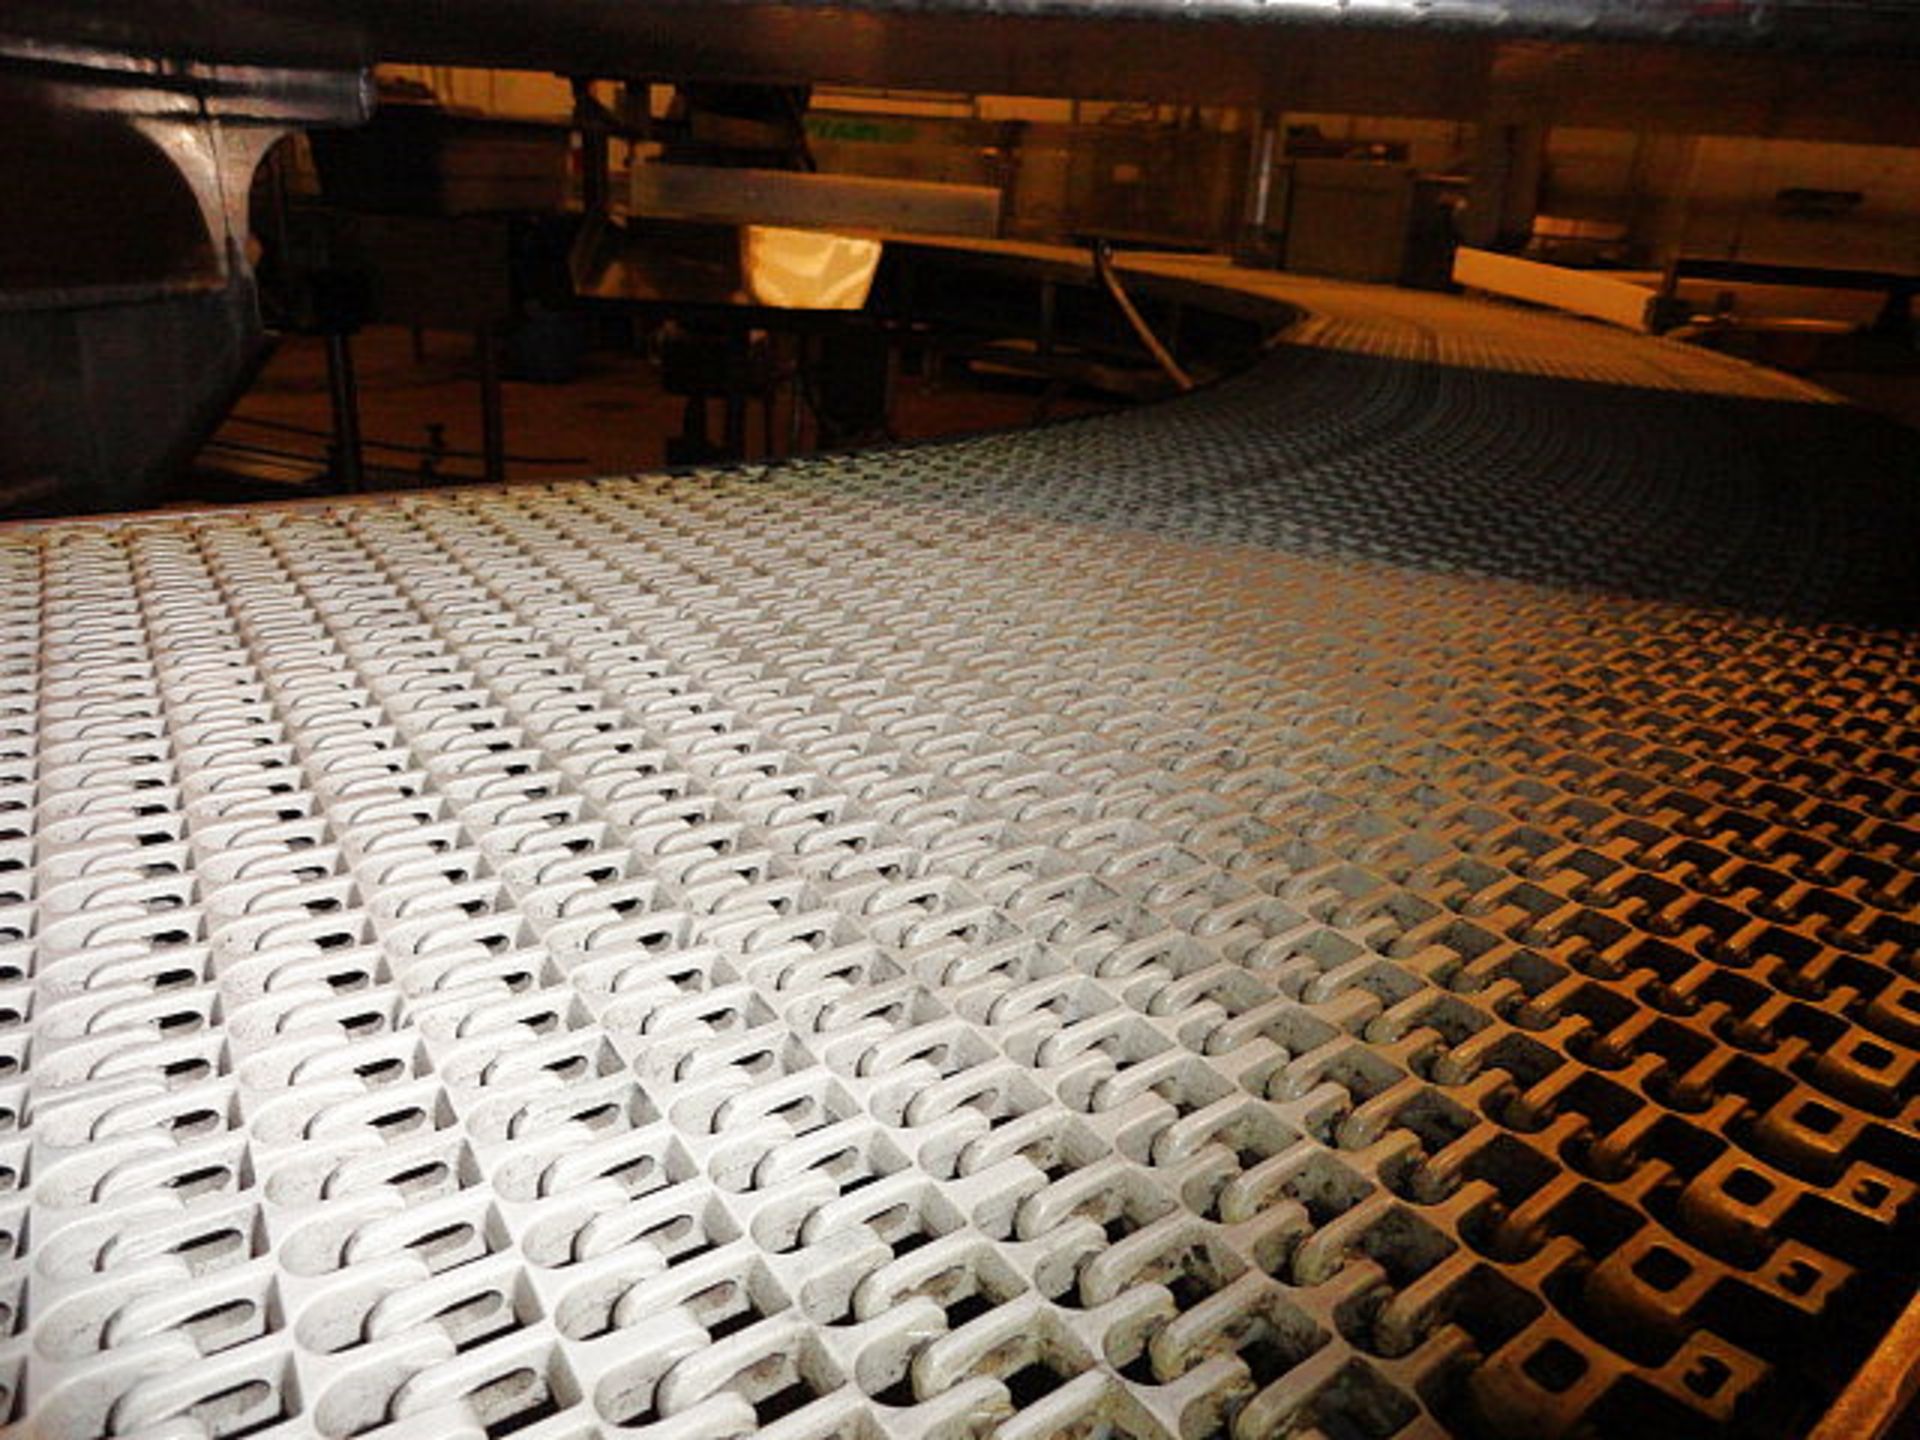 180º Stainless Steel Turn Conveyor, 18" wide x 12' radius, 47" high, ($150.00 Required Loading - Image 2 of 3